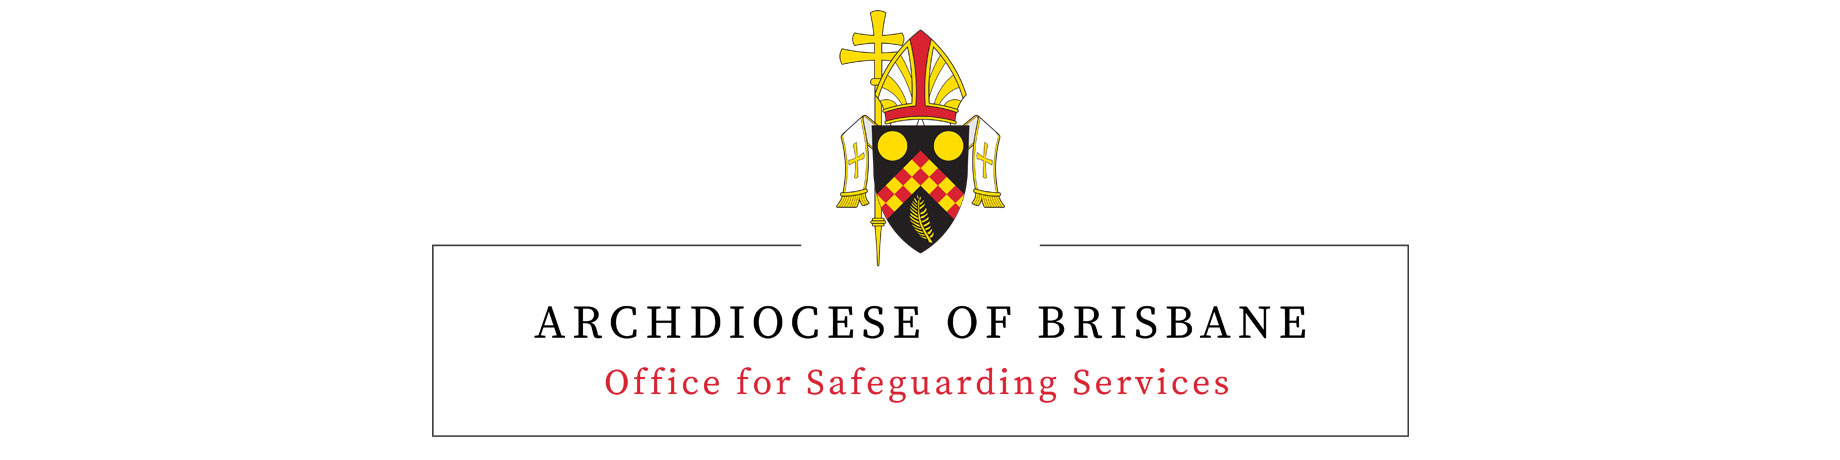 Office for Safeguarding Services